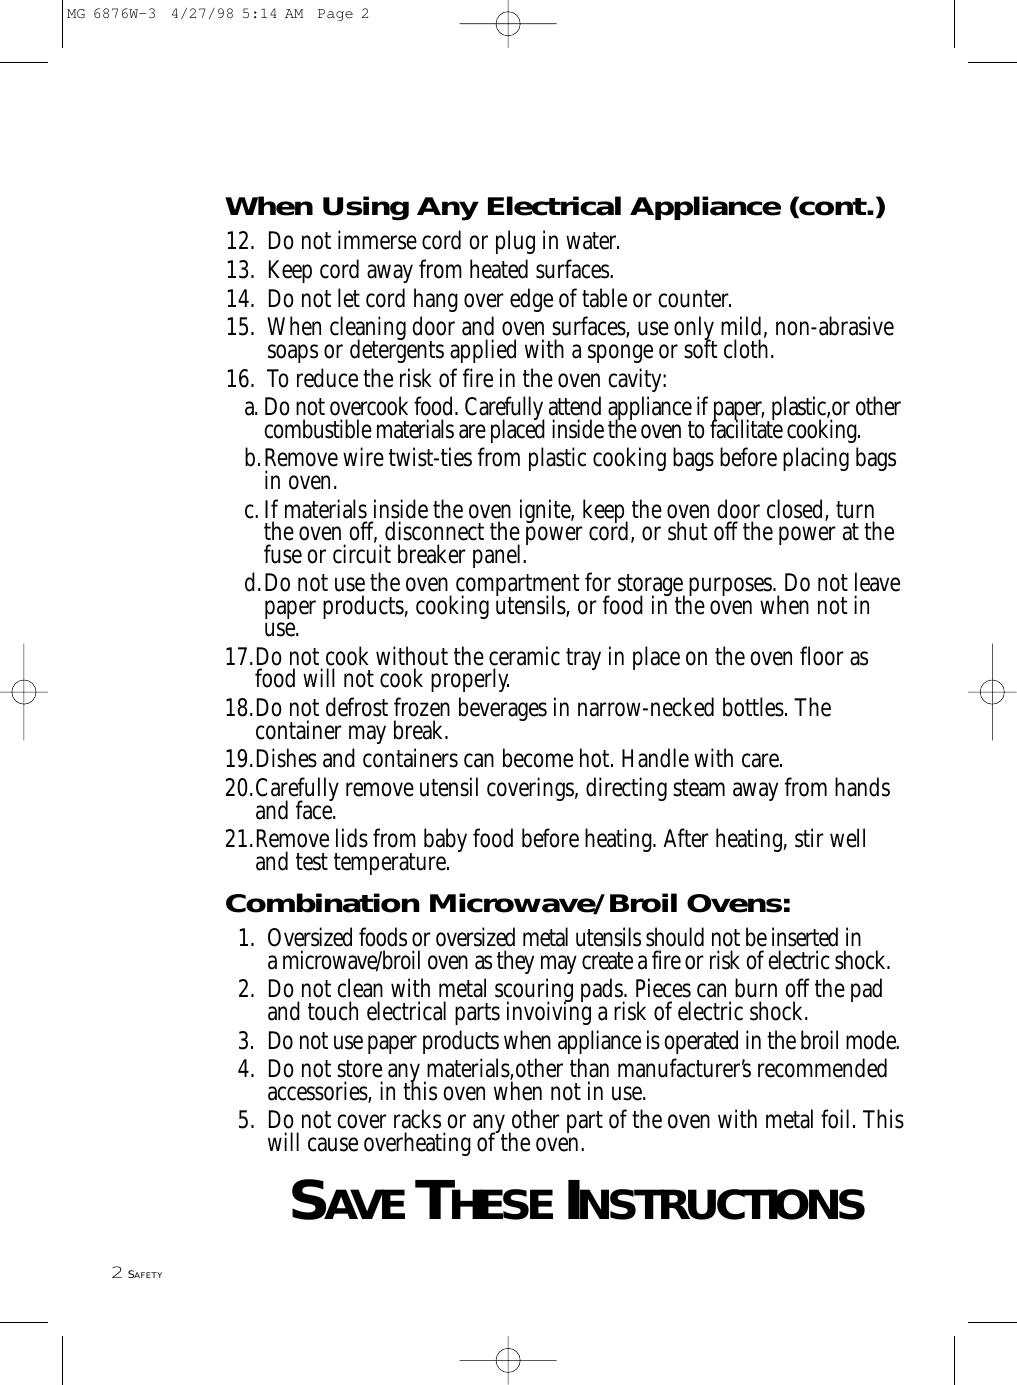 2SAFETYWhen Using Any Electrical Appliance (cont.)12. Do not immerse cord or plug in water.13. Keep cord away from heated surfaces.14. Do not let cord hang over edge of table or counter.15. When cleaning door and oven surfaces, use only mild, non-abrasive soaps or detergents applied with a sponge or soft cloth.16. To reduce the risk of fire in the oven cavity:a. Do not overcook food. Carefully attend appliance if paper, plastic,or othercombustible materials are placed inside the oven to facilitate cooking.b.Remove wire twist-ties from plastic cooking bags before placing bagsin oven.c.If materials inside the oven ignite, keep the oven door closed, turnthe oven off, disconnect the power cord, or shut off the power at thefuse or circuit breaker panel.d.Do not use the oven compartment for storage purposes. Do not leavepaper products, cooking utensils, or food in the oven when not inuse.17.Do not cook without the ceramic tray in place on the oven floor as food will not cook properly.18.Do not defrost frozen beverages in narrow-necked bottles. The container may break.19.Dishes and containers can become hot. Handle with care.20.Carefully remove utensil coverings, directing steam away from hands and face.21.Remove lids from baby food before heating. After heating, stir well and test temperature.Combination Microwave/Broil Ovens:1. Oversized foods or oversized metal utensils should not be inserted in a microwave/broil oven as they may create a fire or risk of electric shock.2. Do not clean with metal scouring pads. Pieces can burn off the pad and touch electrical parts invoiving a risk of electric shock.3. Do not use paper products when appliance is operated in the broil mode.4. Do not store any materials,other than manufacturer’s recommended accessories, in this oven when not in use.5. Do not cover racks or any other part of the oven with metal foil. Thiswill cause overheating of the oven.SAVETHESEINSTRUCTIONSMG 6876W-3  4/27/98 5:14 AM  Page 2